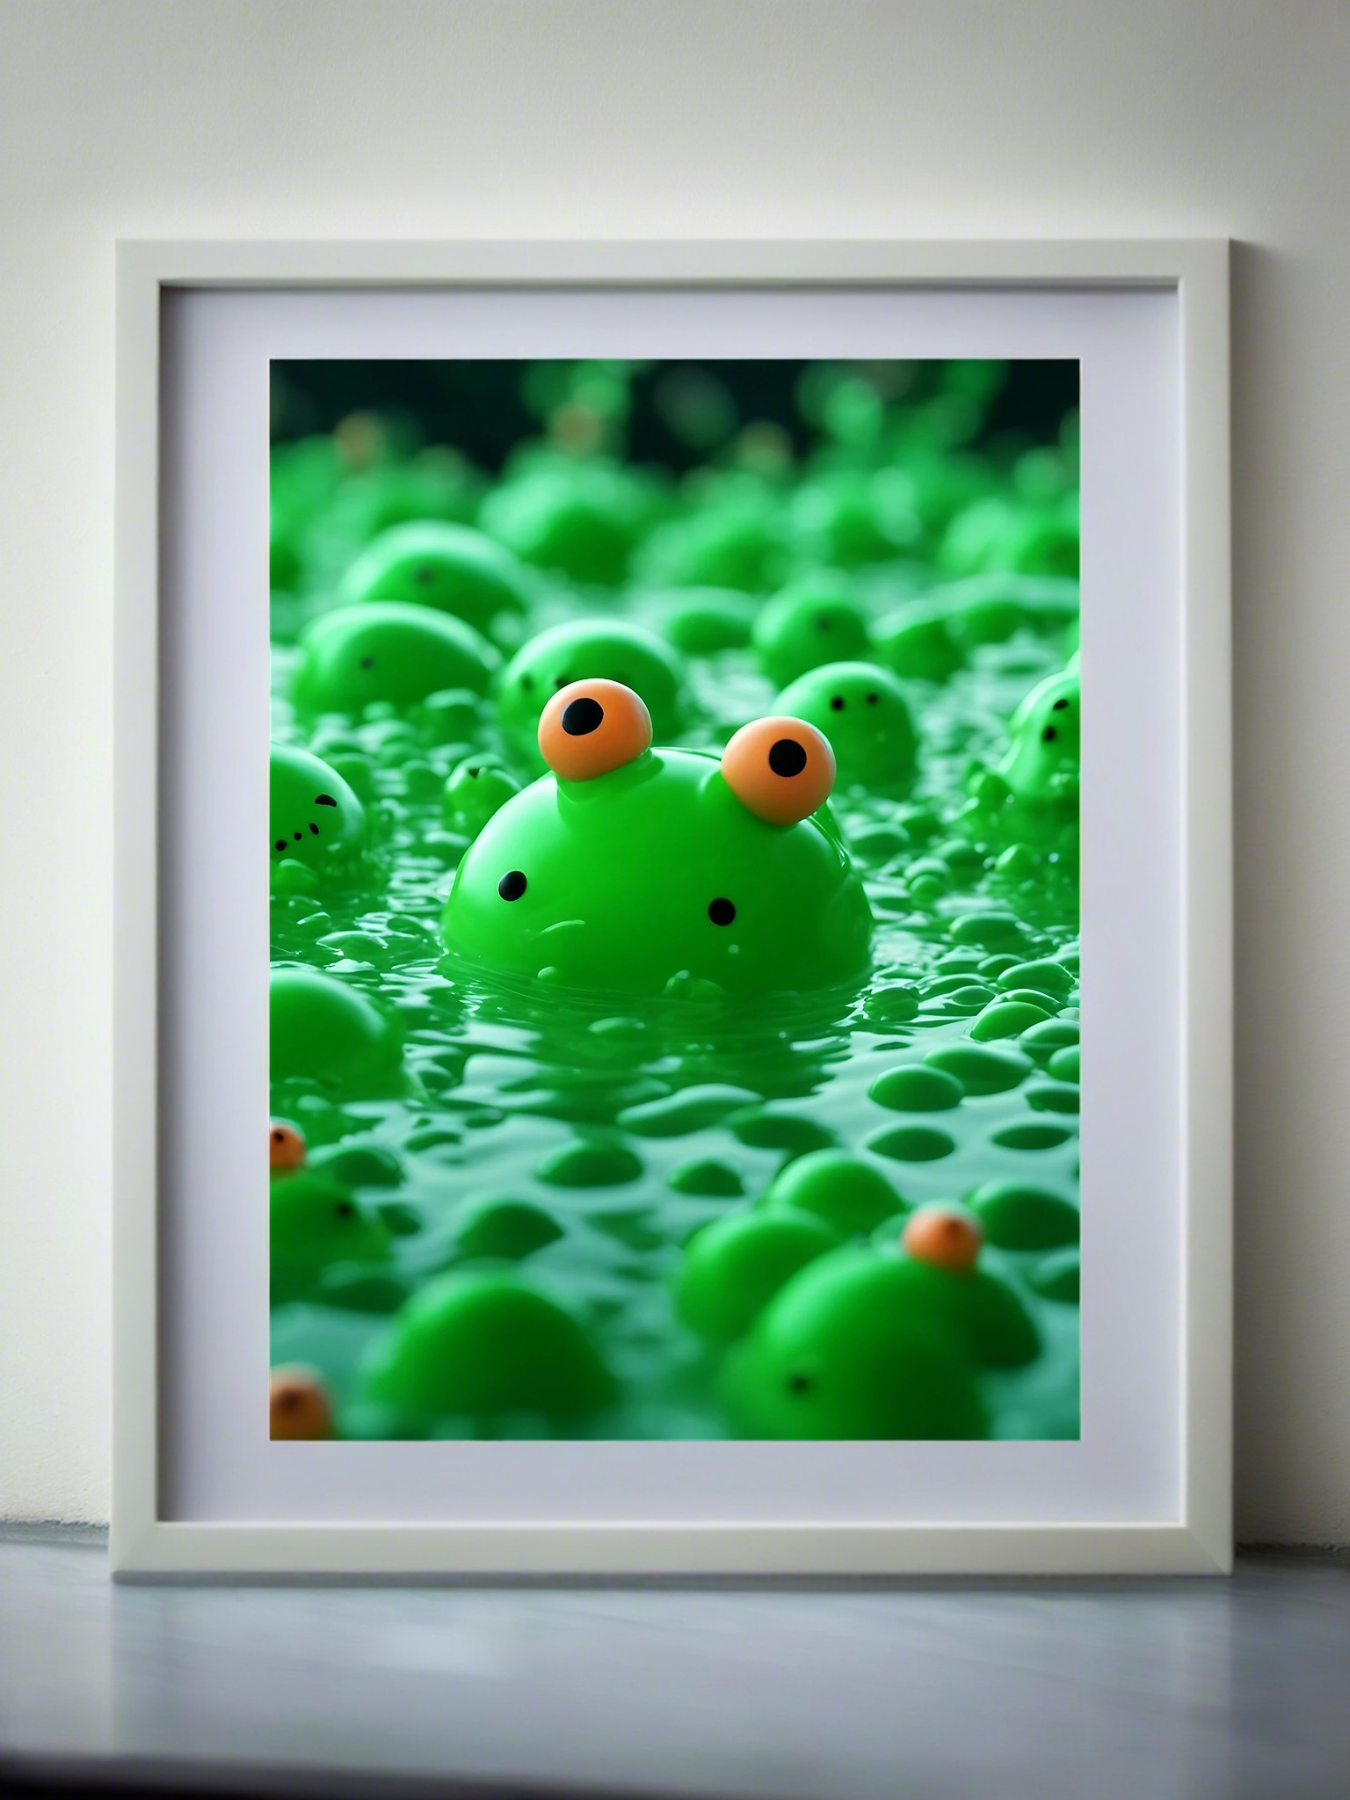 Lots of cute green slime monsters in the lake - fantasy mini photo poster - 27x20 cm 4